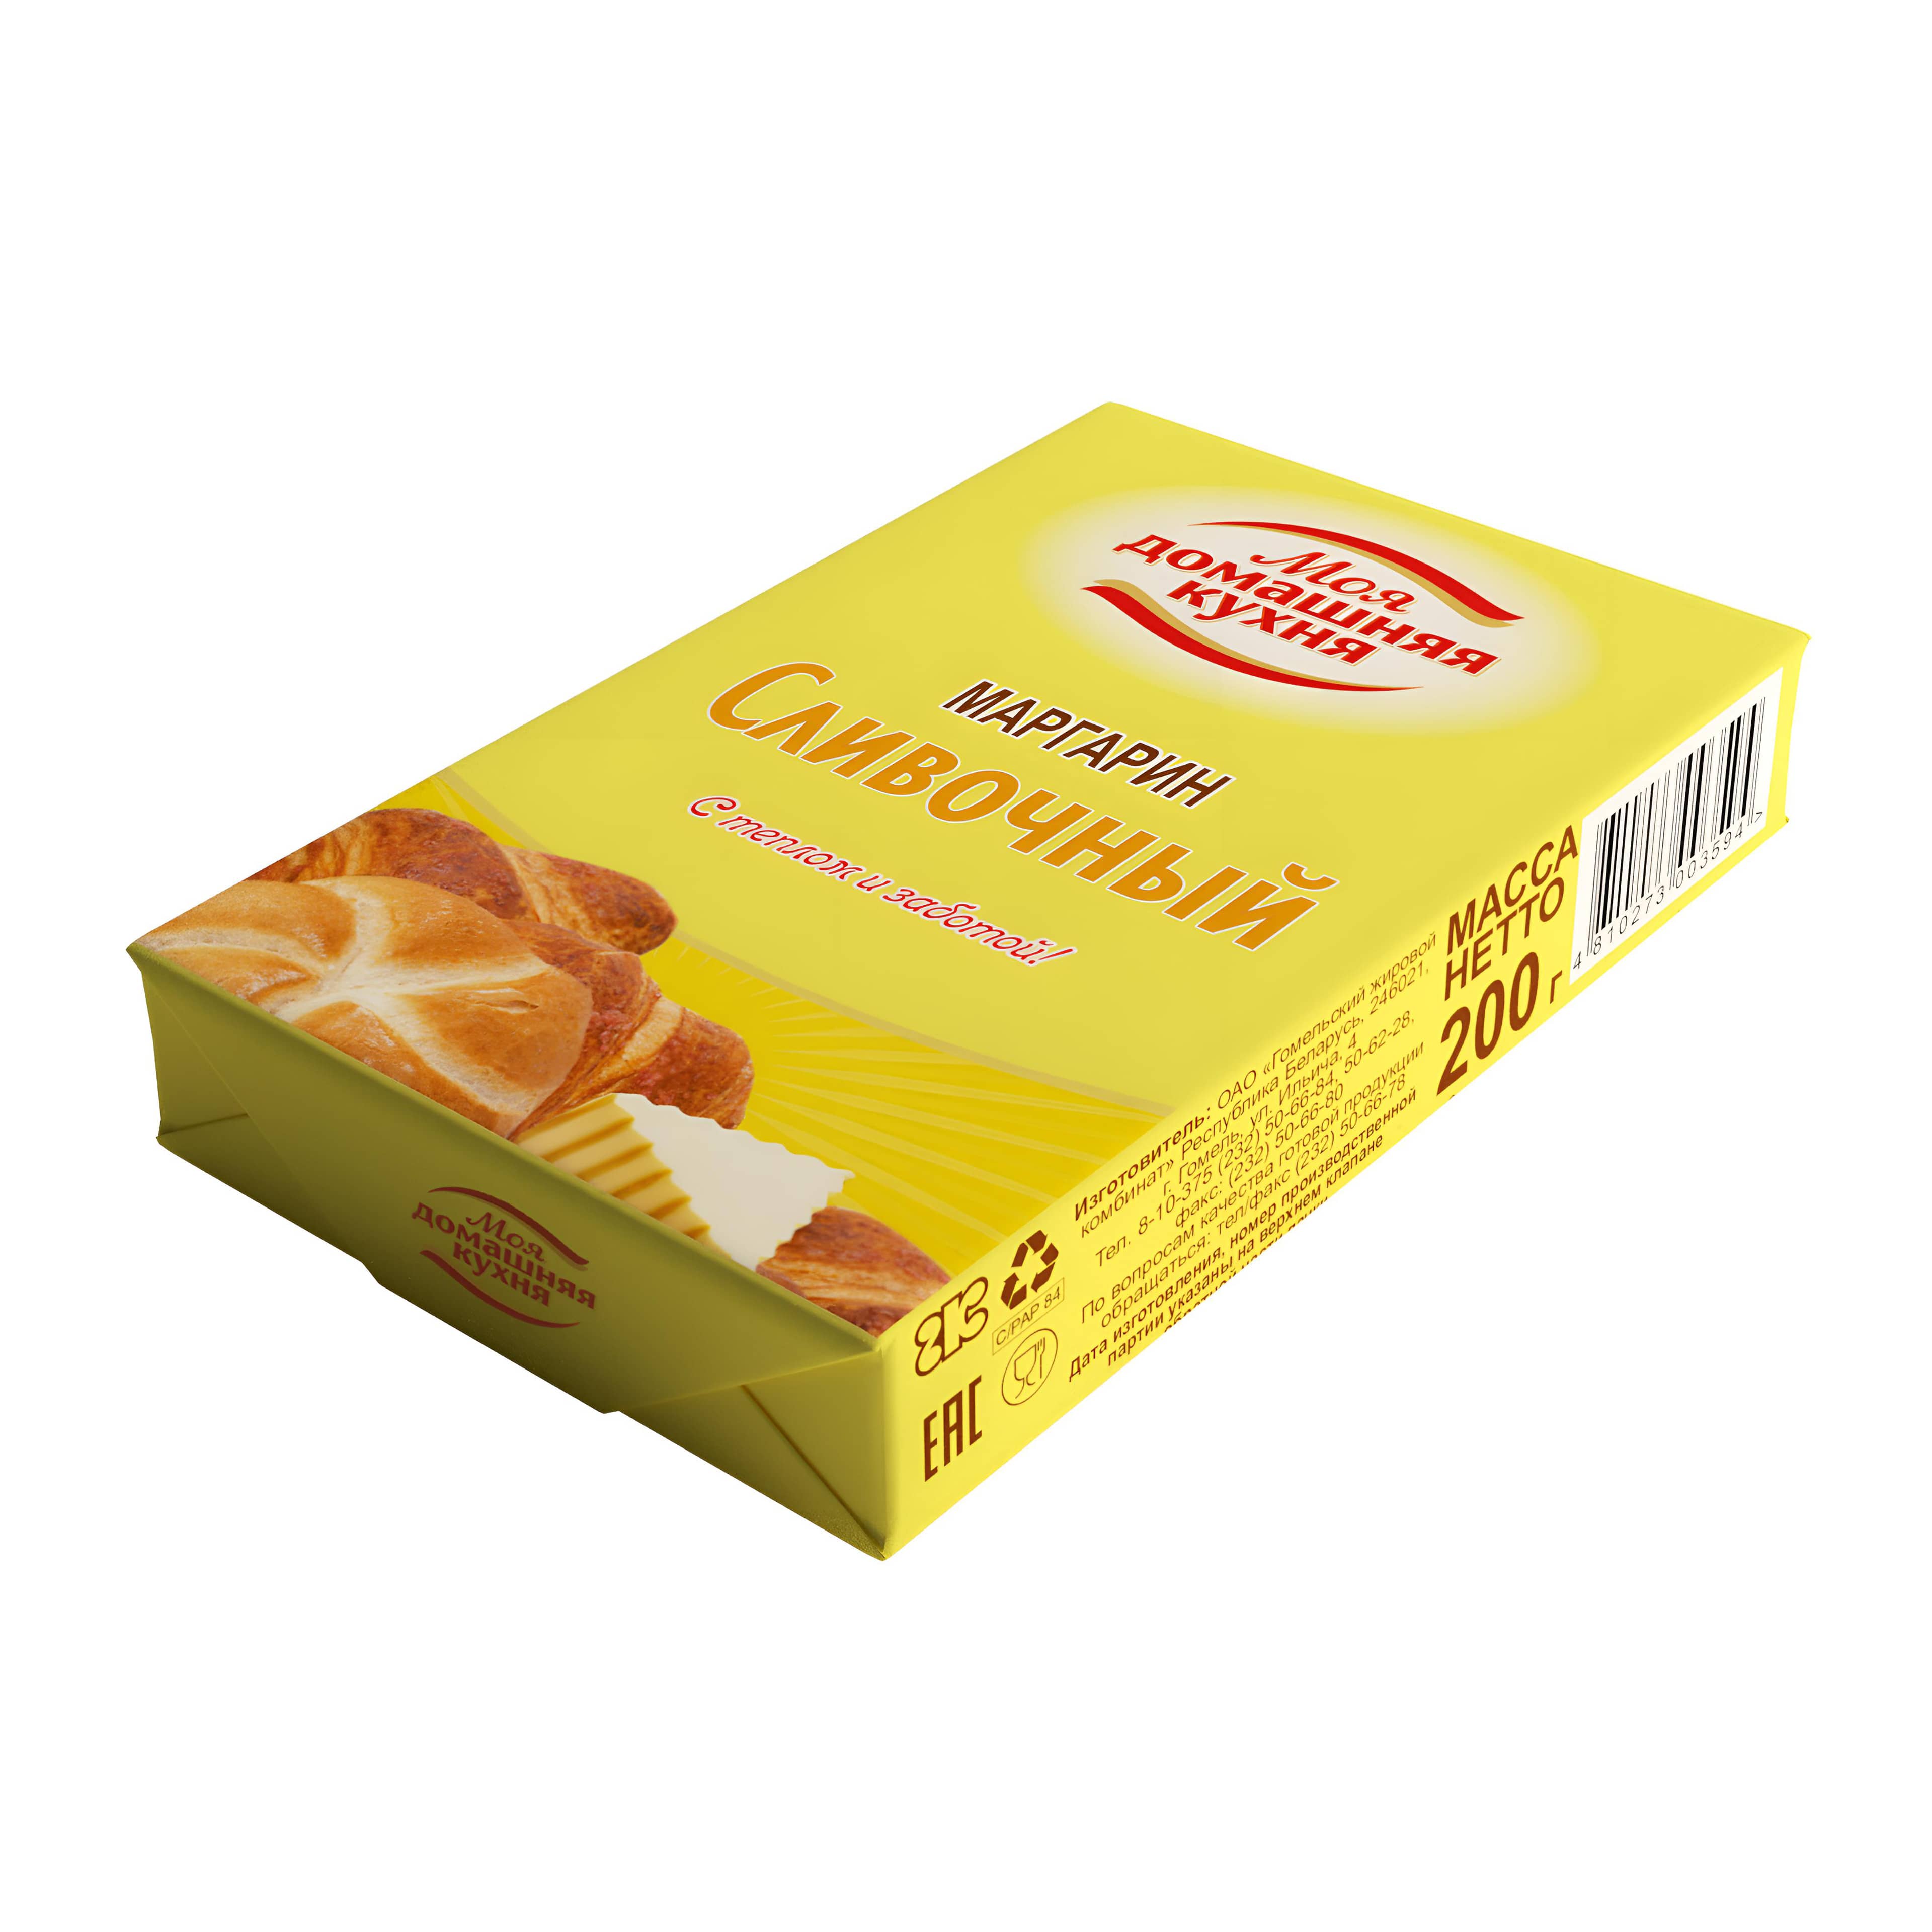 Creamy margarine in bulk from the manufacturer